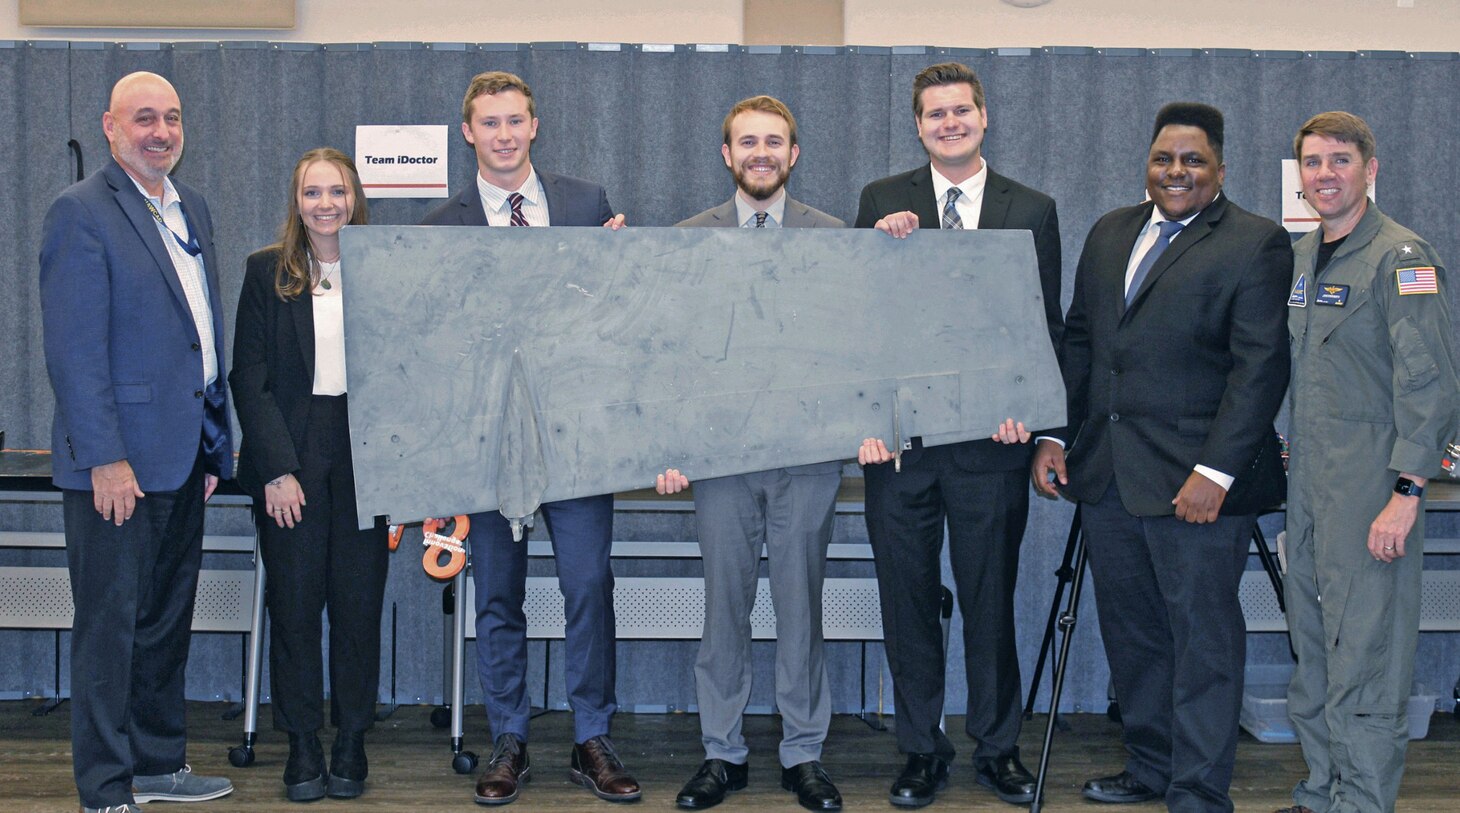 “TEAM iDOCTOR (Inspection and De-icing using Cold formation Thermal Object Recognition) at Naval Air Warfare Center Aircraft Division, Lakehurst, New Jersey, pose with an F/A-18 wing panel which was used as a test article as part of their work in identifying ice accumulation on aircraft as part of the team’s NAVAIR Innovation Challenge. From left is Stephen Cricchi, Executive Director NAWCAD, Sarah Bunn, Trevor Hinds, Stephen Opet III, Charles Homoki, Jonathan Alcantara and Rear Adm. John “Doc” Dougherty IV, Commander, NAWCAD.